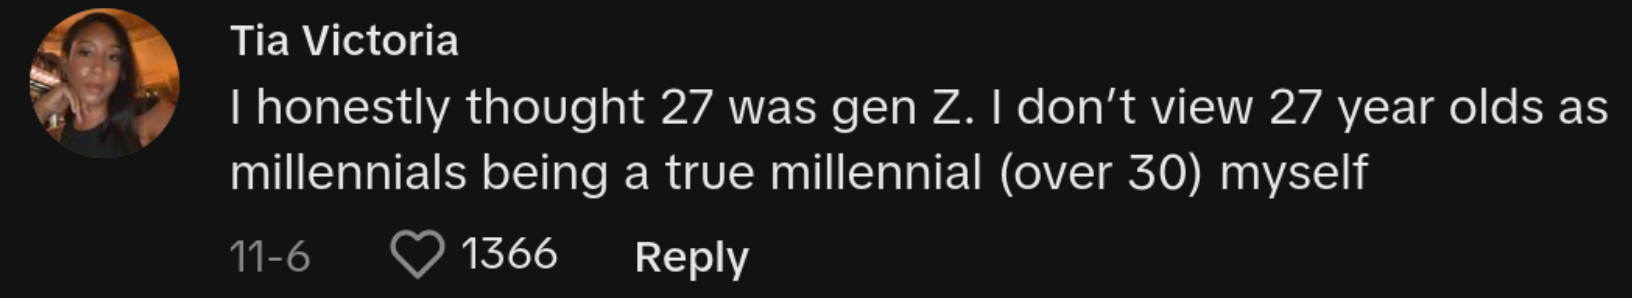 Comment on viral video of woman saying she was shamed for her "old" email address by Gen Z worker.